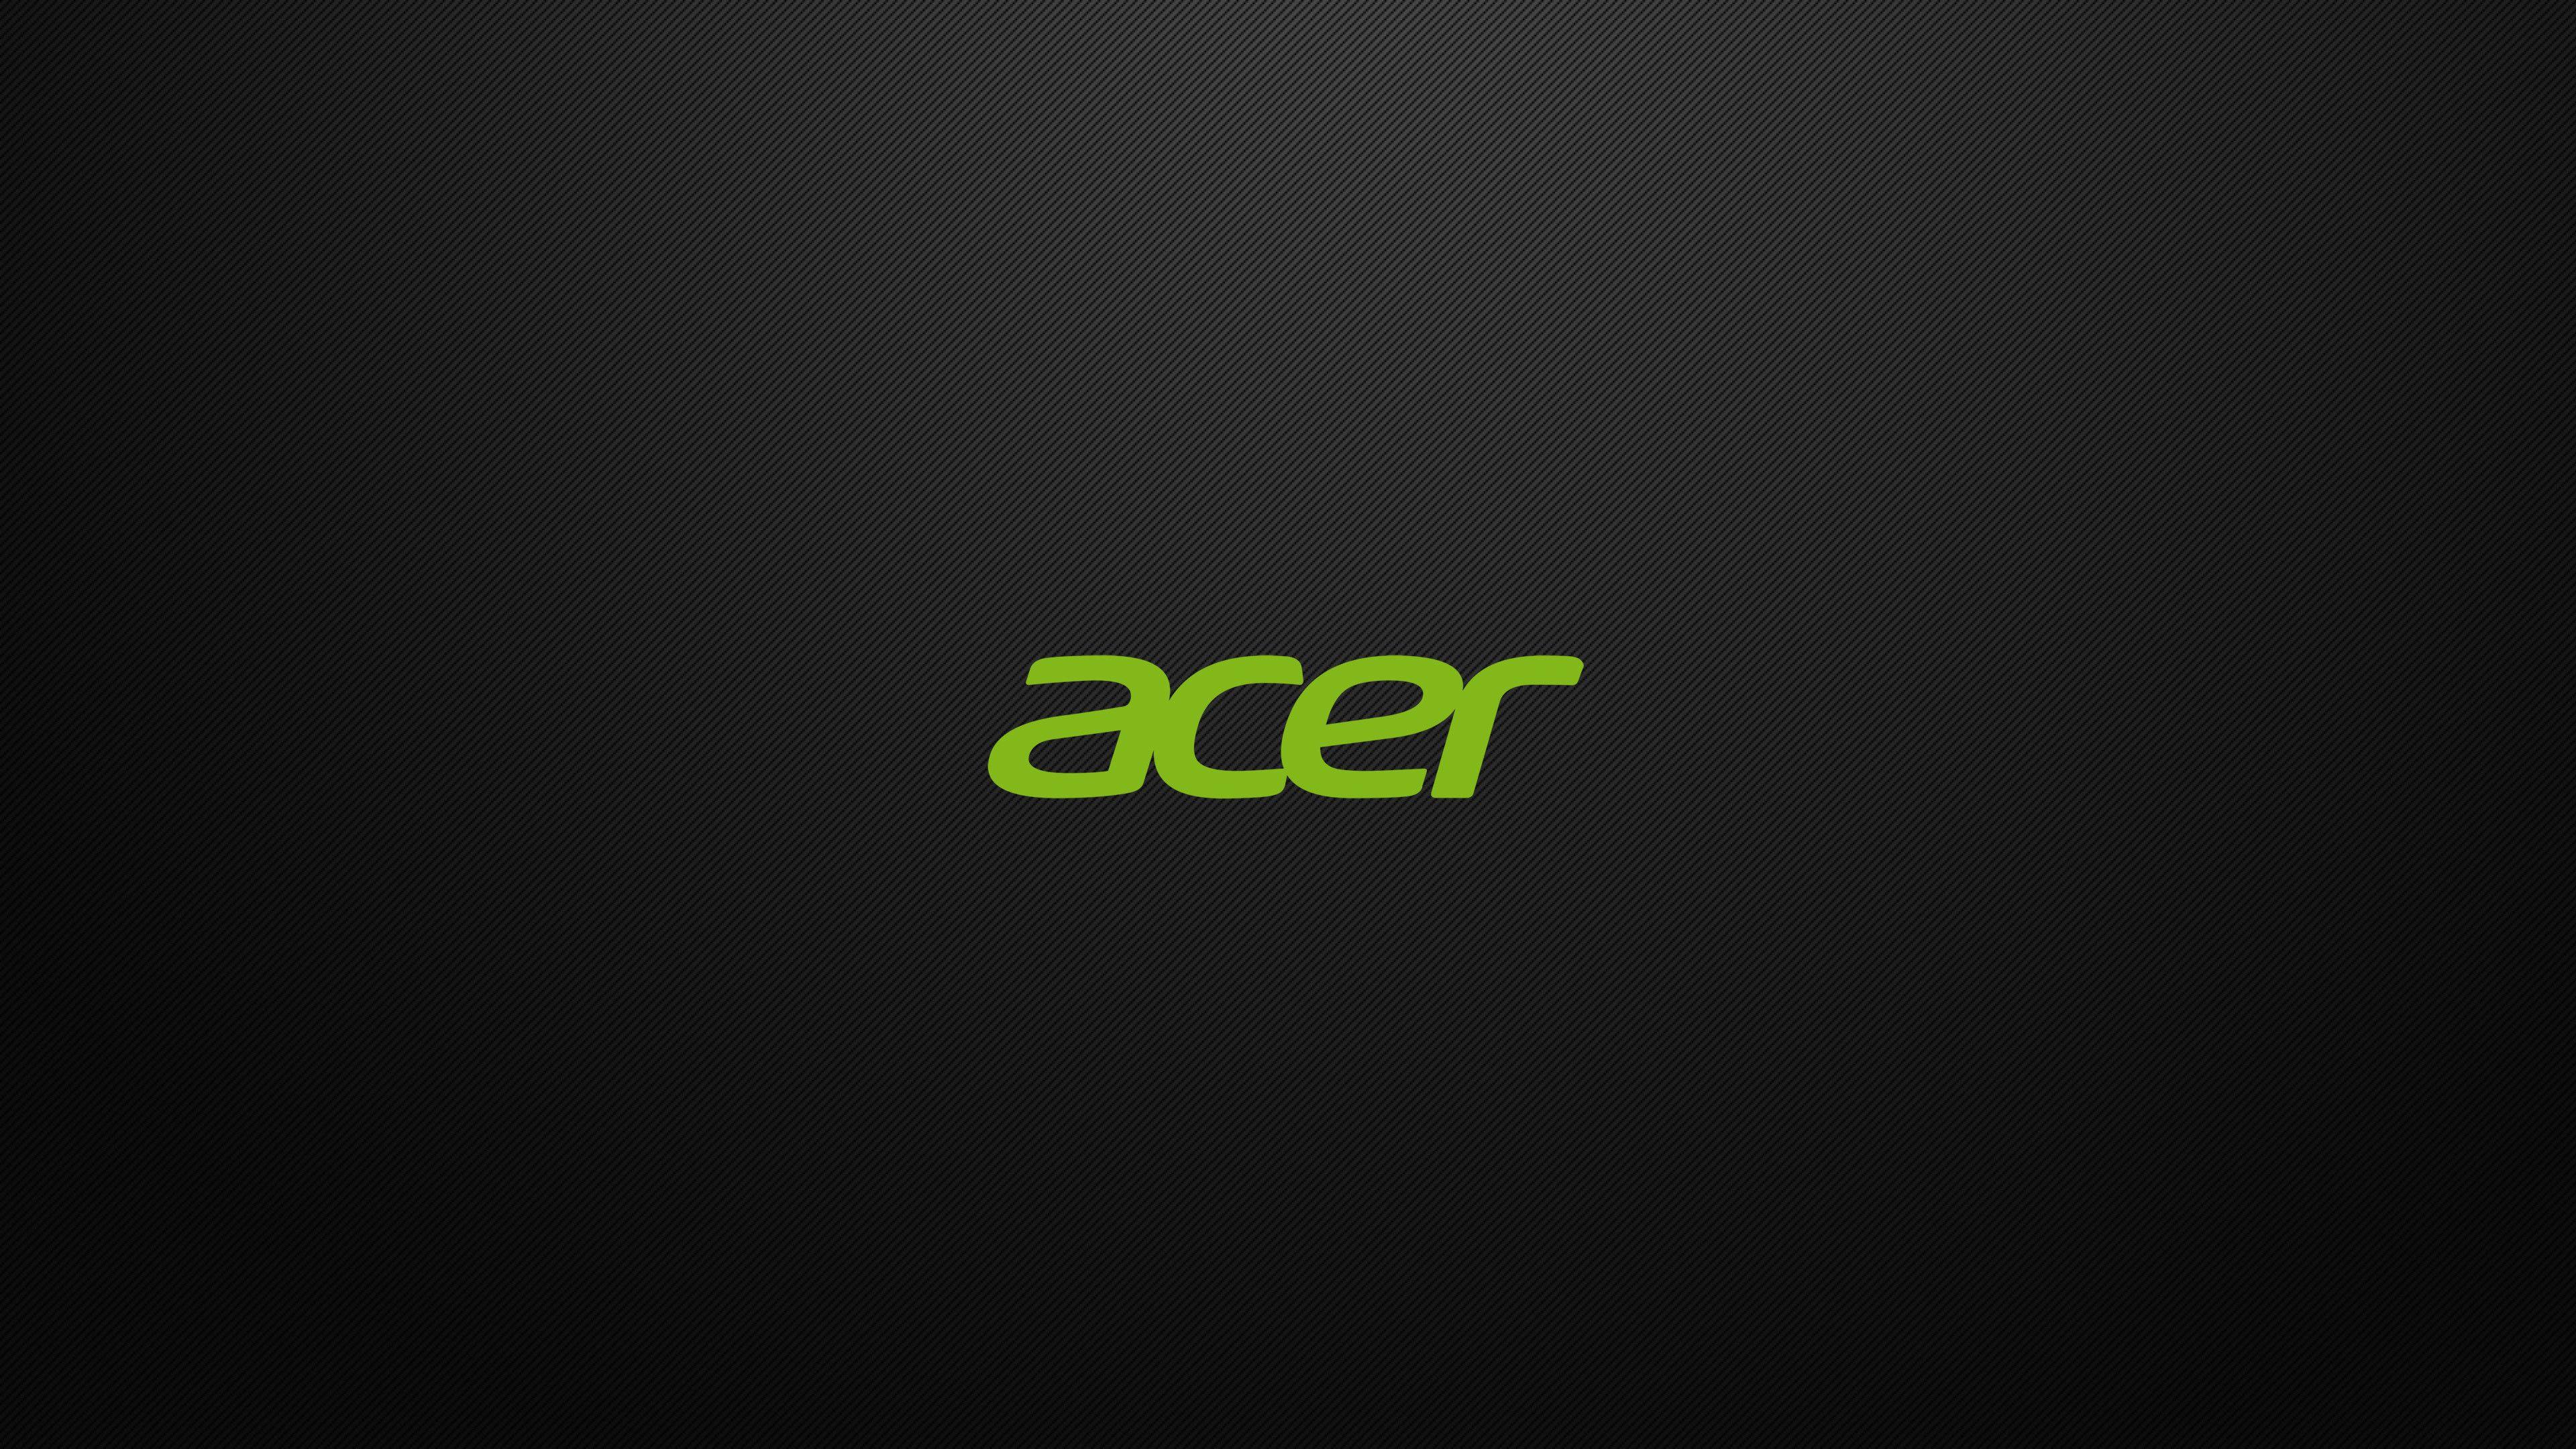 Acer Black Wallpapers Top Free Acer Black Backgrounds Wallpaperaccess Download and share awesome cool background hd mobile phone wallpapers. acer black wallpapers top free acer